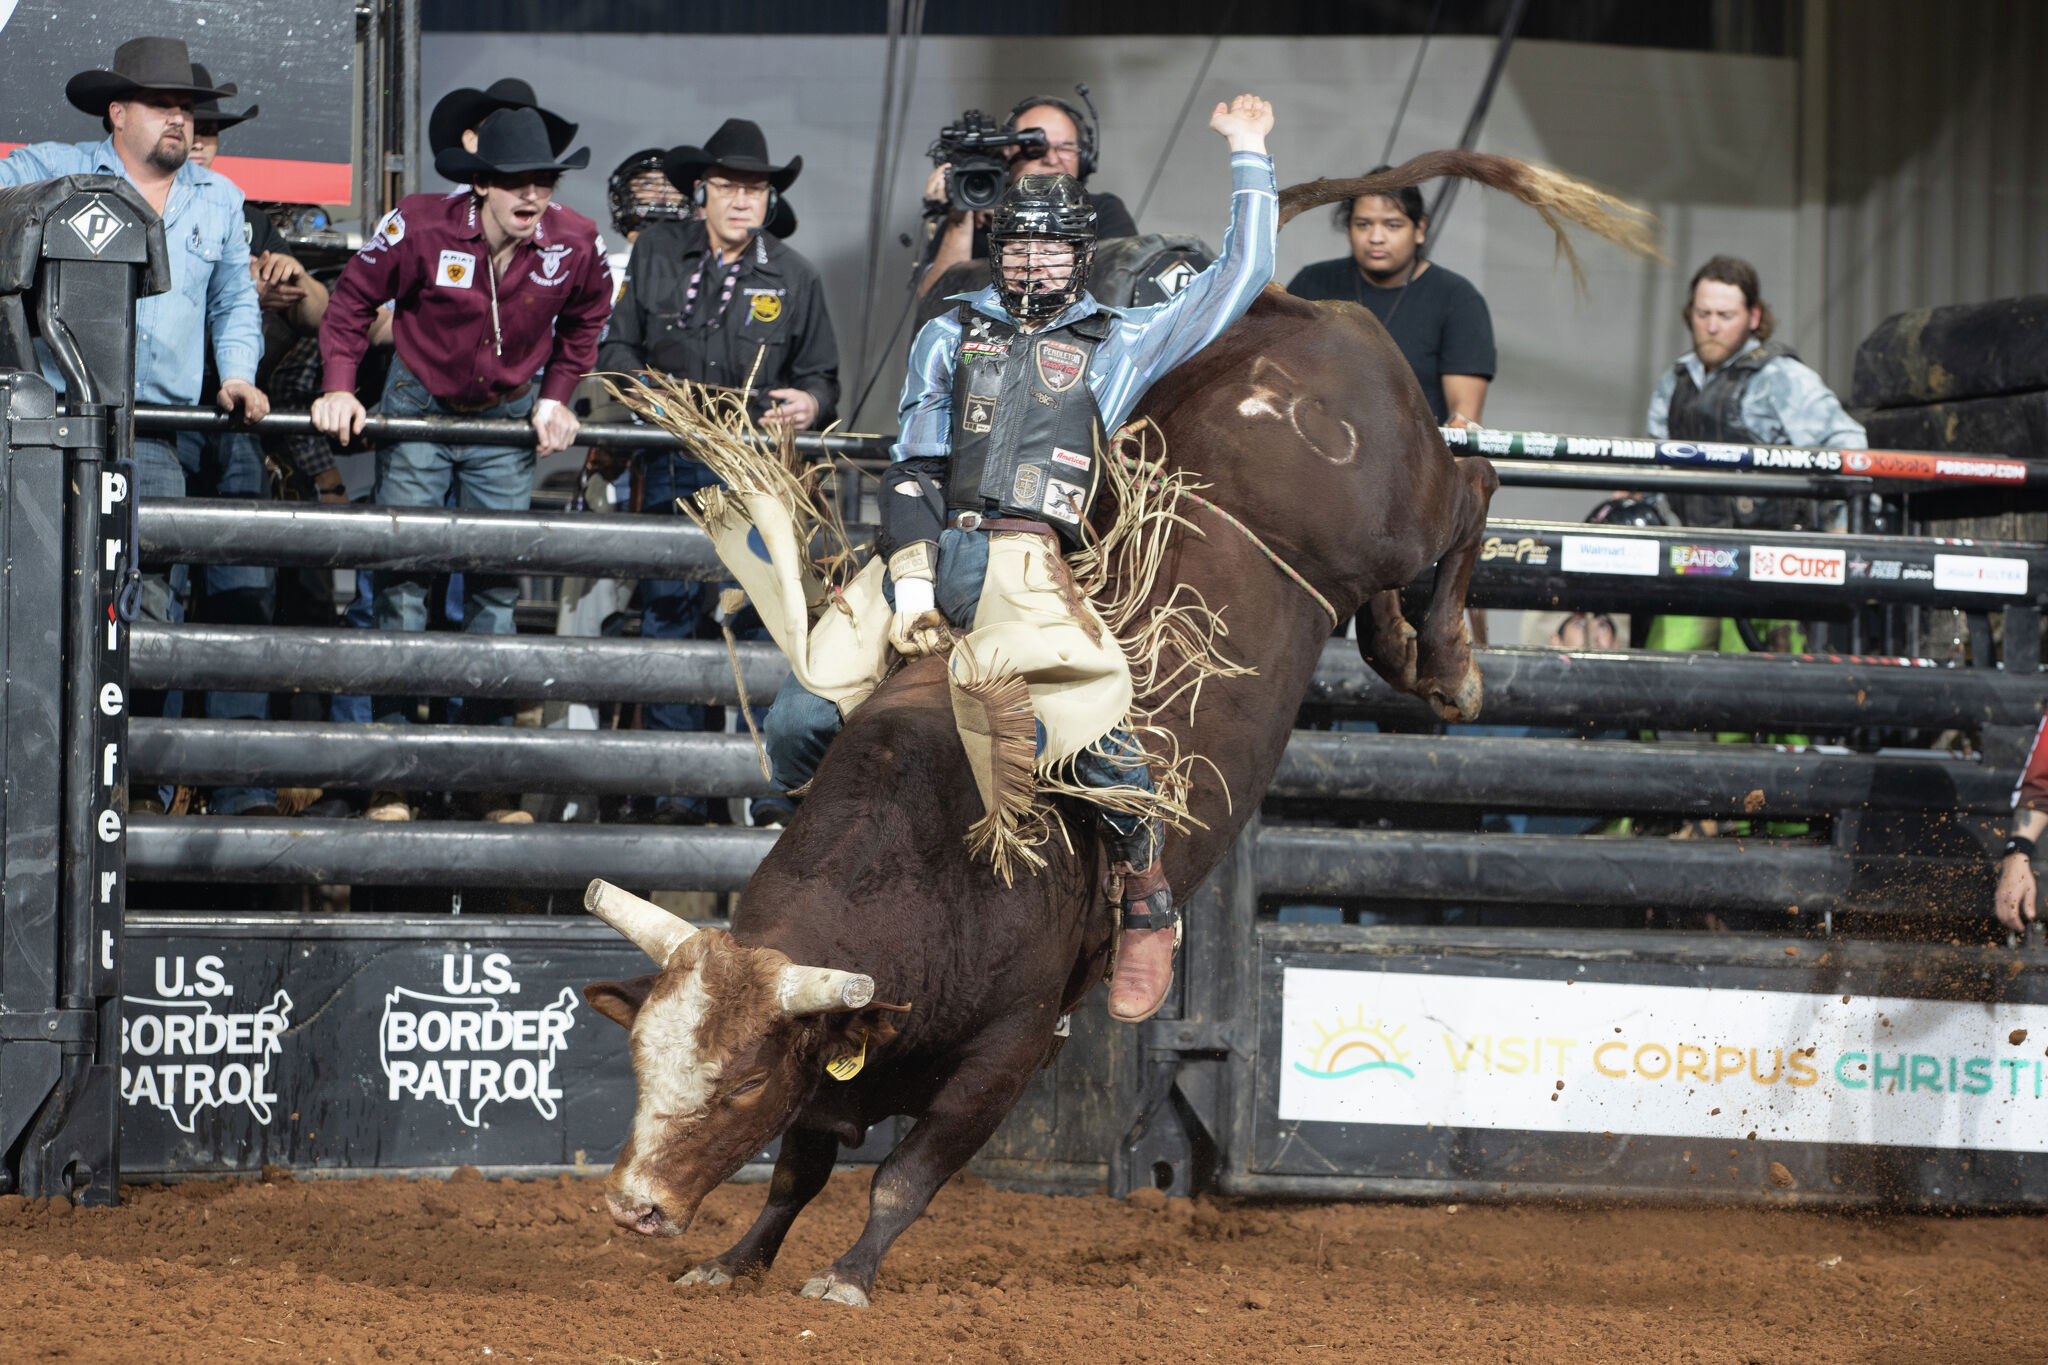 Professional Bull Riders event aims to bring 'slice of Americana' to ...